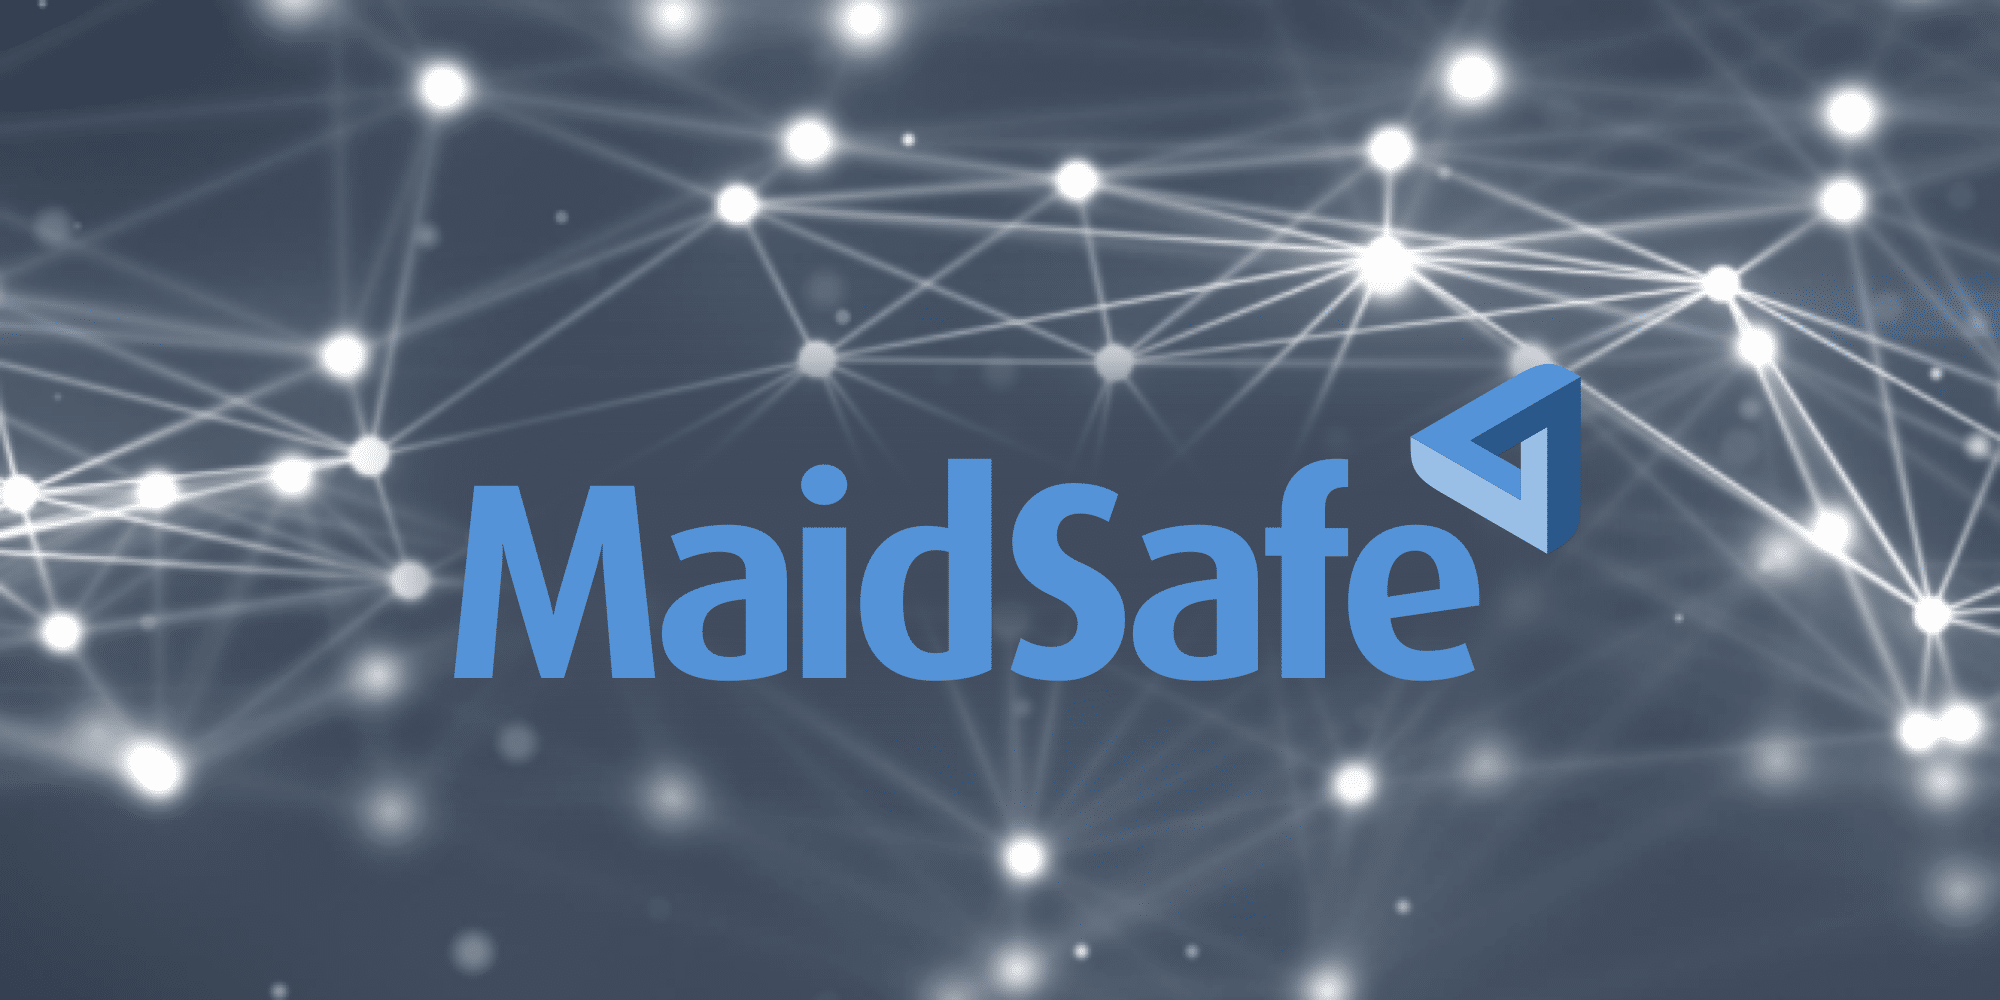 It's the MaidSAFE scam again, full of buzzwords as usual. I remember being in a | Hacker News